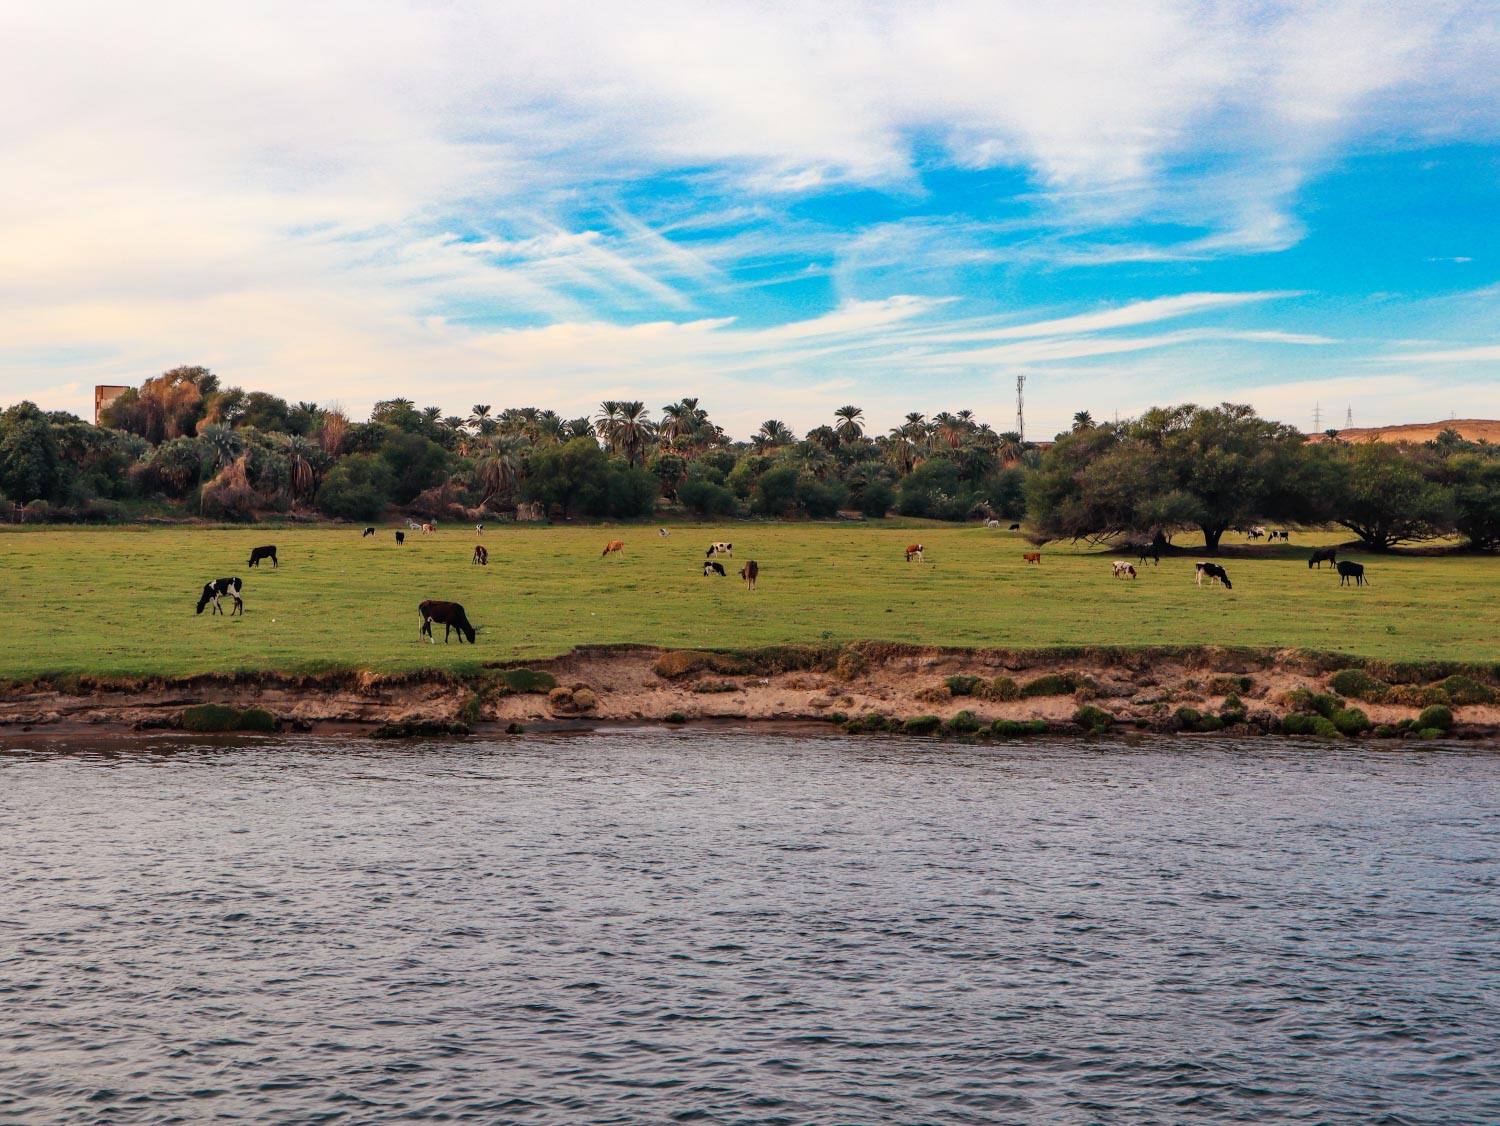 Horses feeding on the banks of the river